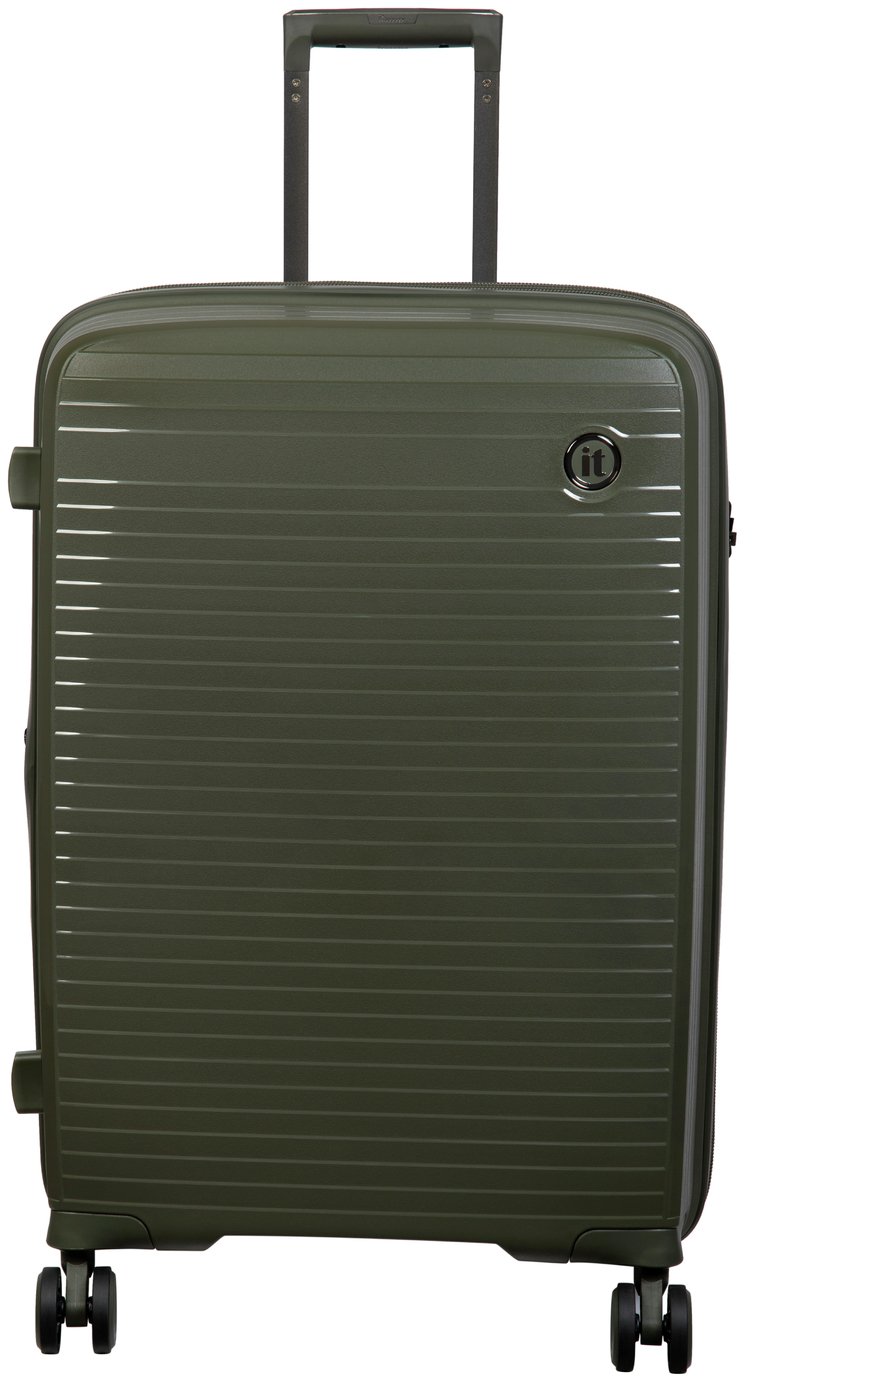 IT Hard Light Weight Expand Cabin 8 Wheel Suitcase - Olive